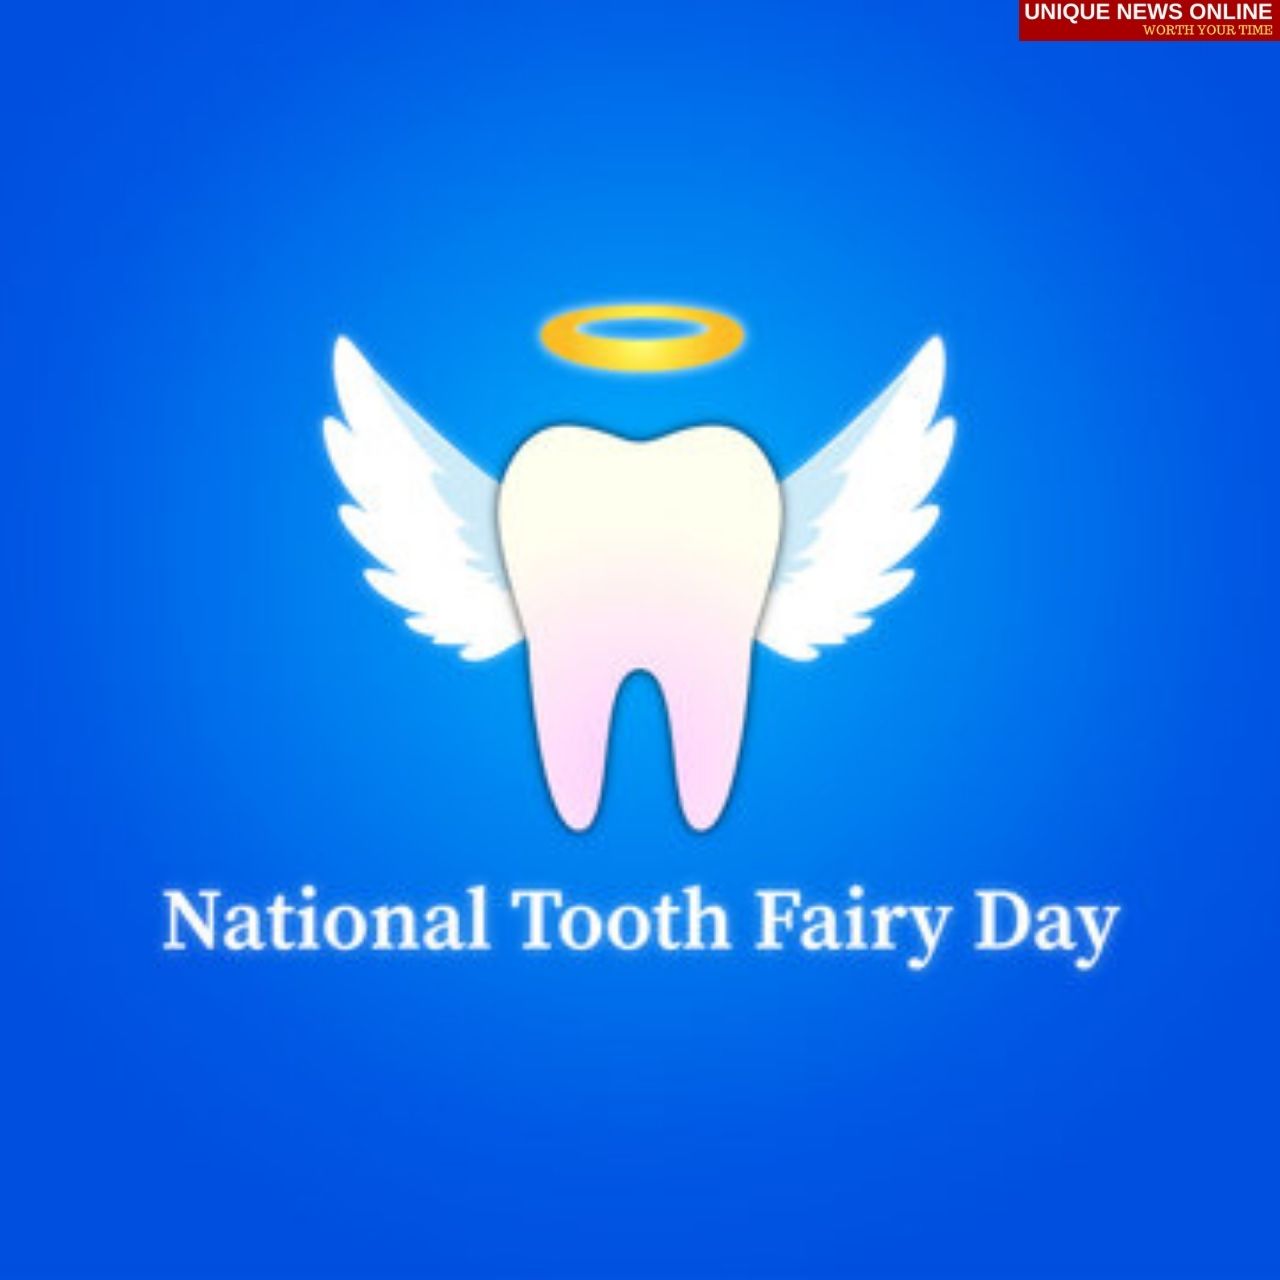 National Tooth Fairy Day (USA) 2022 Quotes, HD Images, Messages to create awareness about good dental hygiene